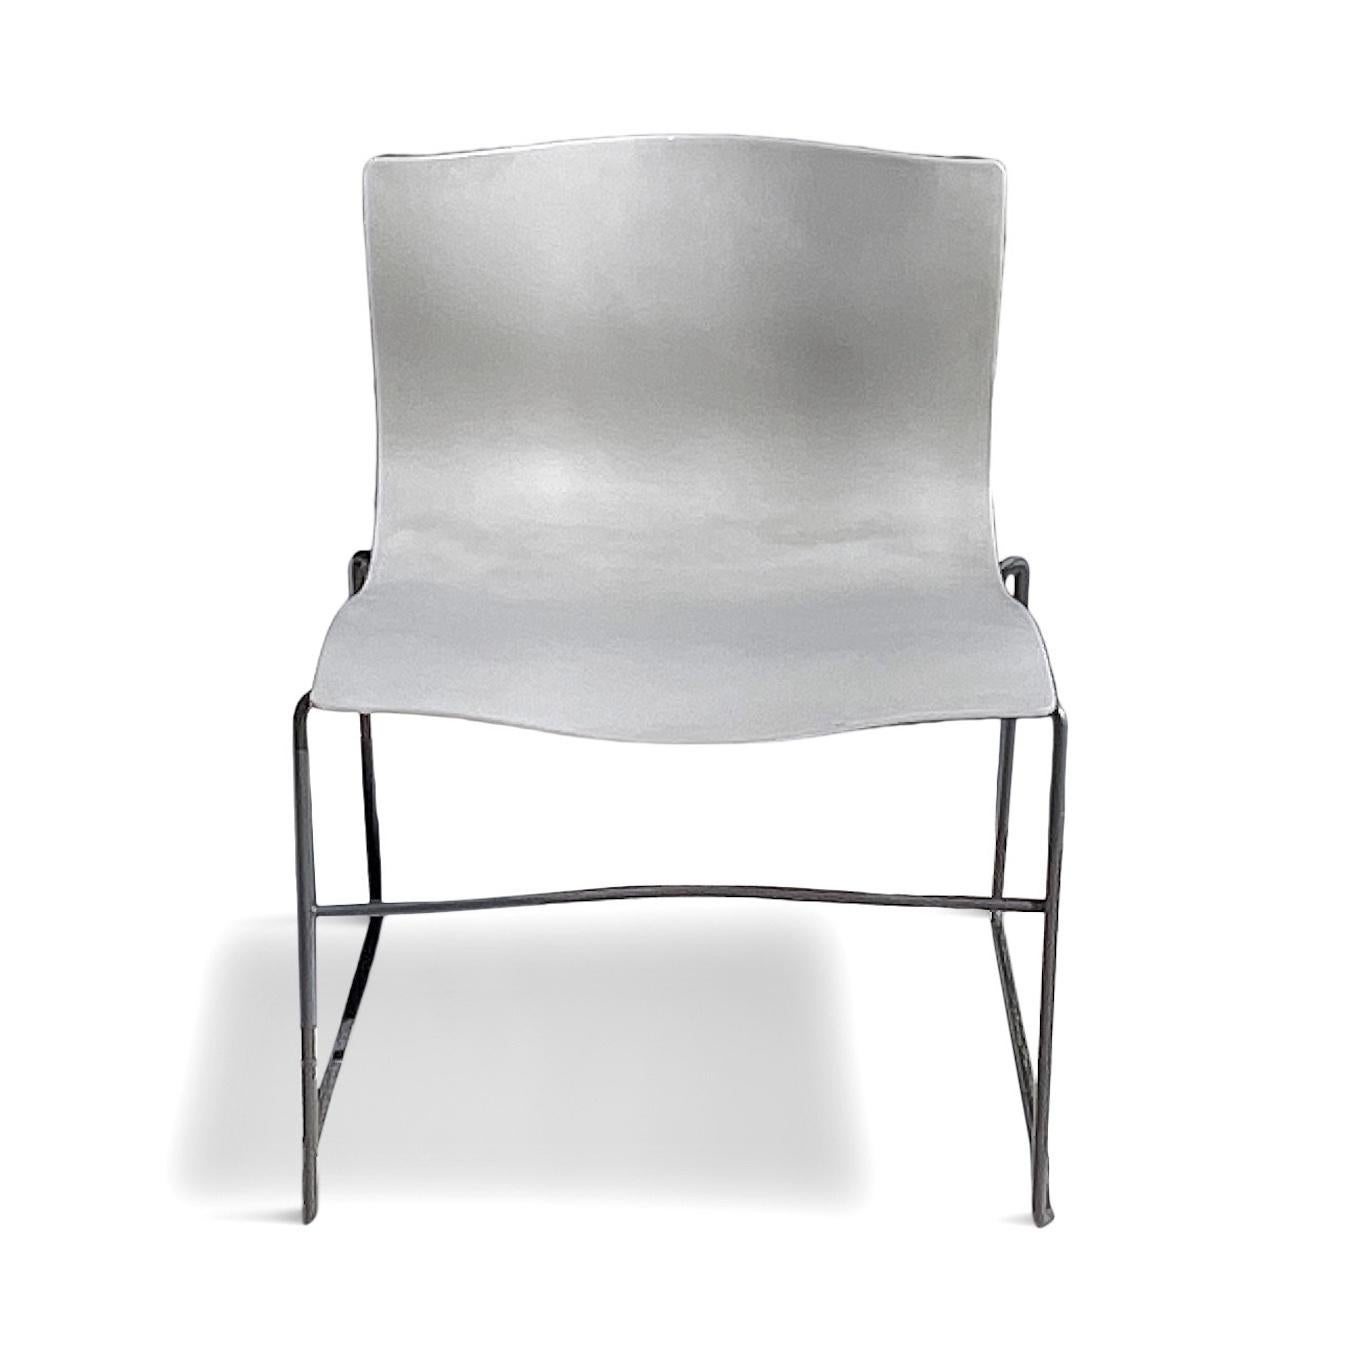 20th Century Set of 5 Grey Handkerchief Chairs by Lella and Massimo Vignelli for Knoll